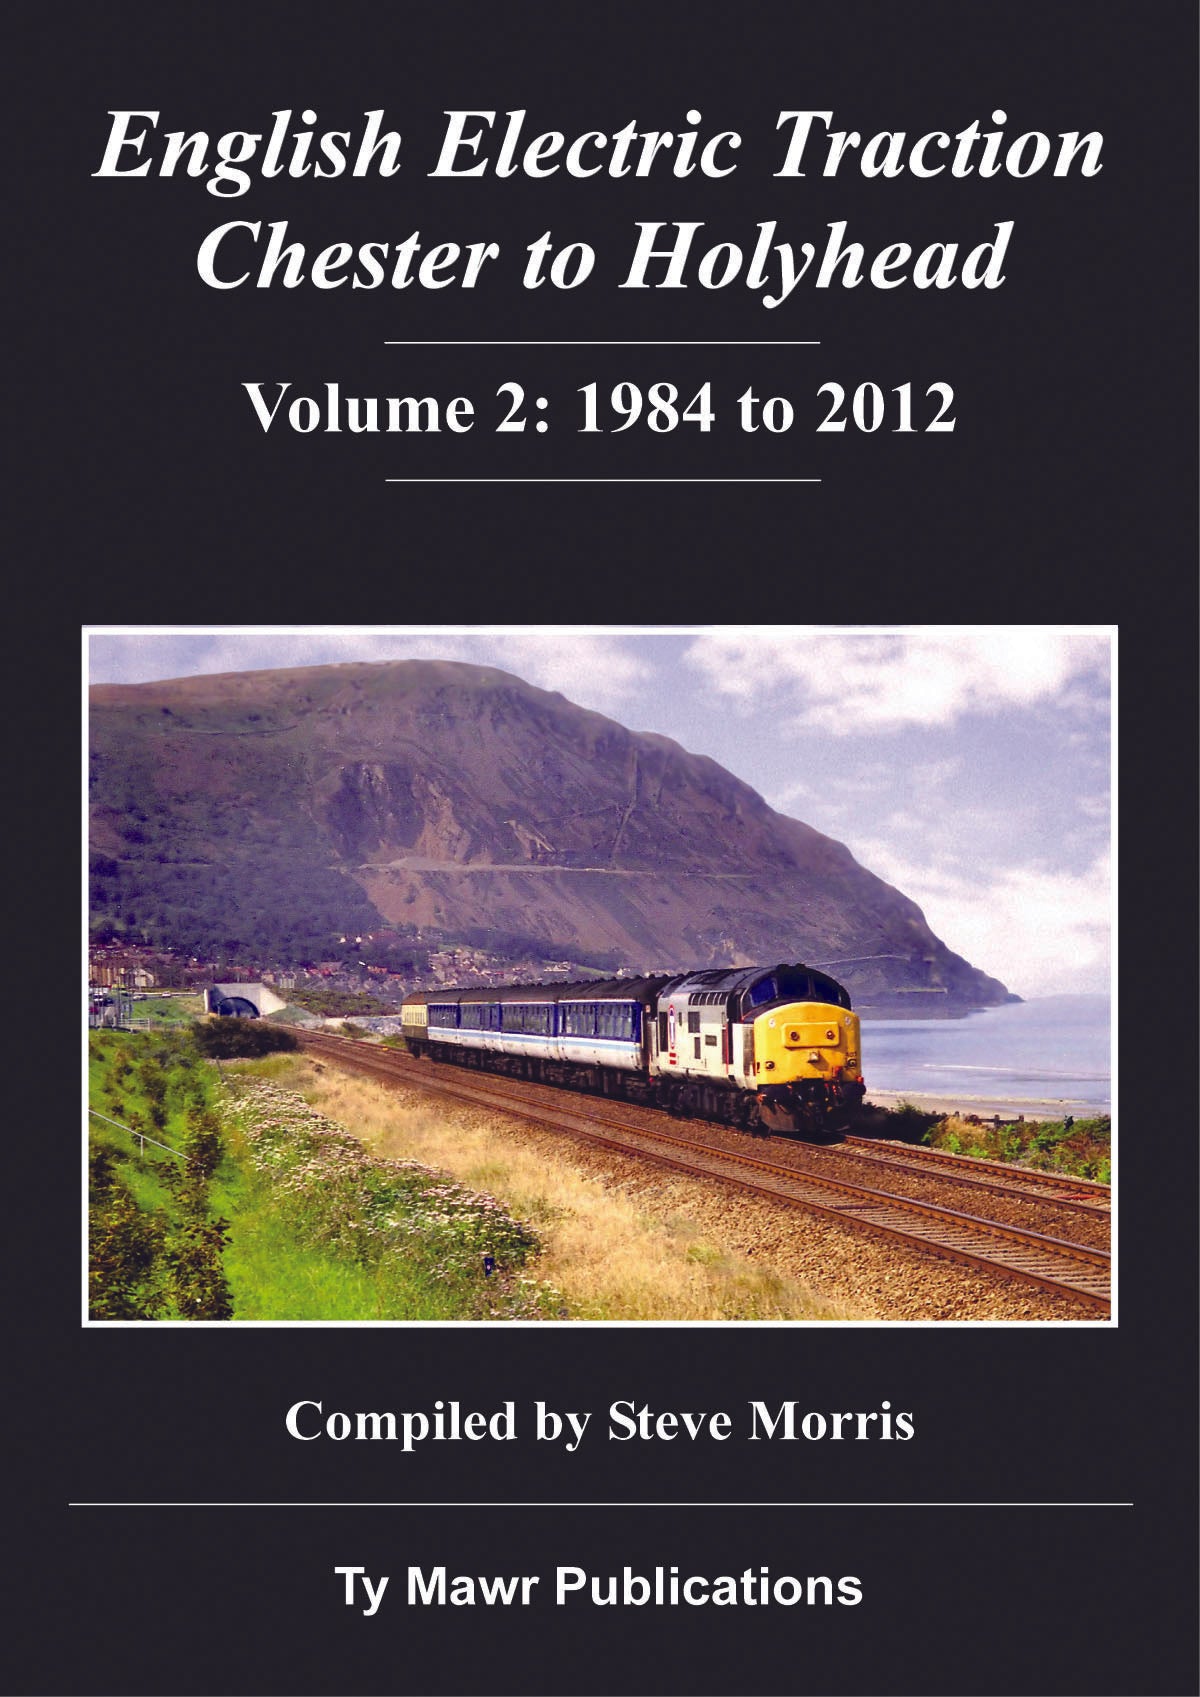 50%+ OFF RRP is £17.95   English Electric Traction Chester to Holyhead Vol 2 1984-2012